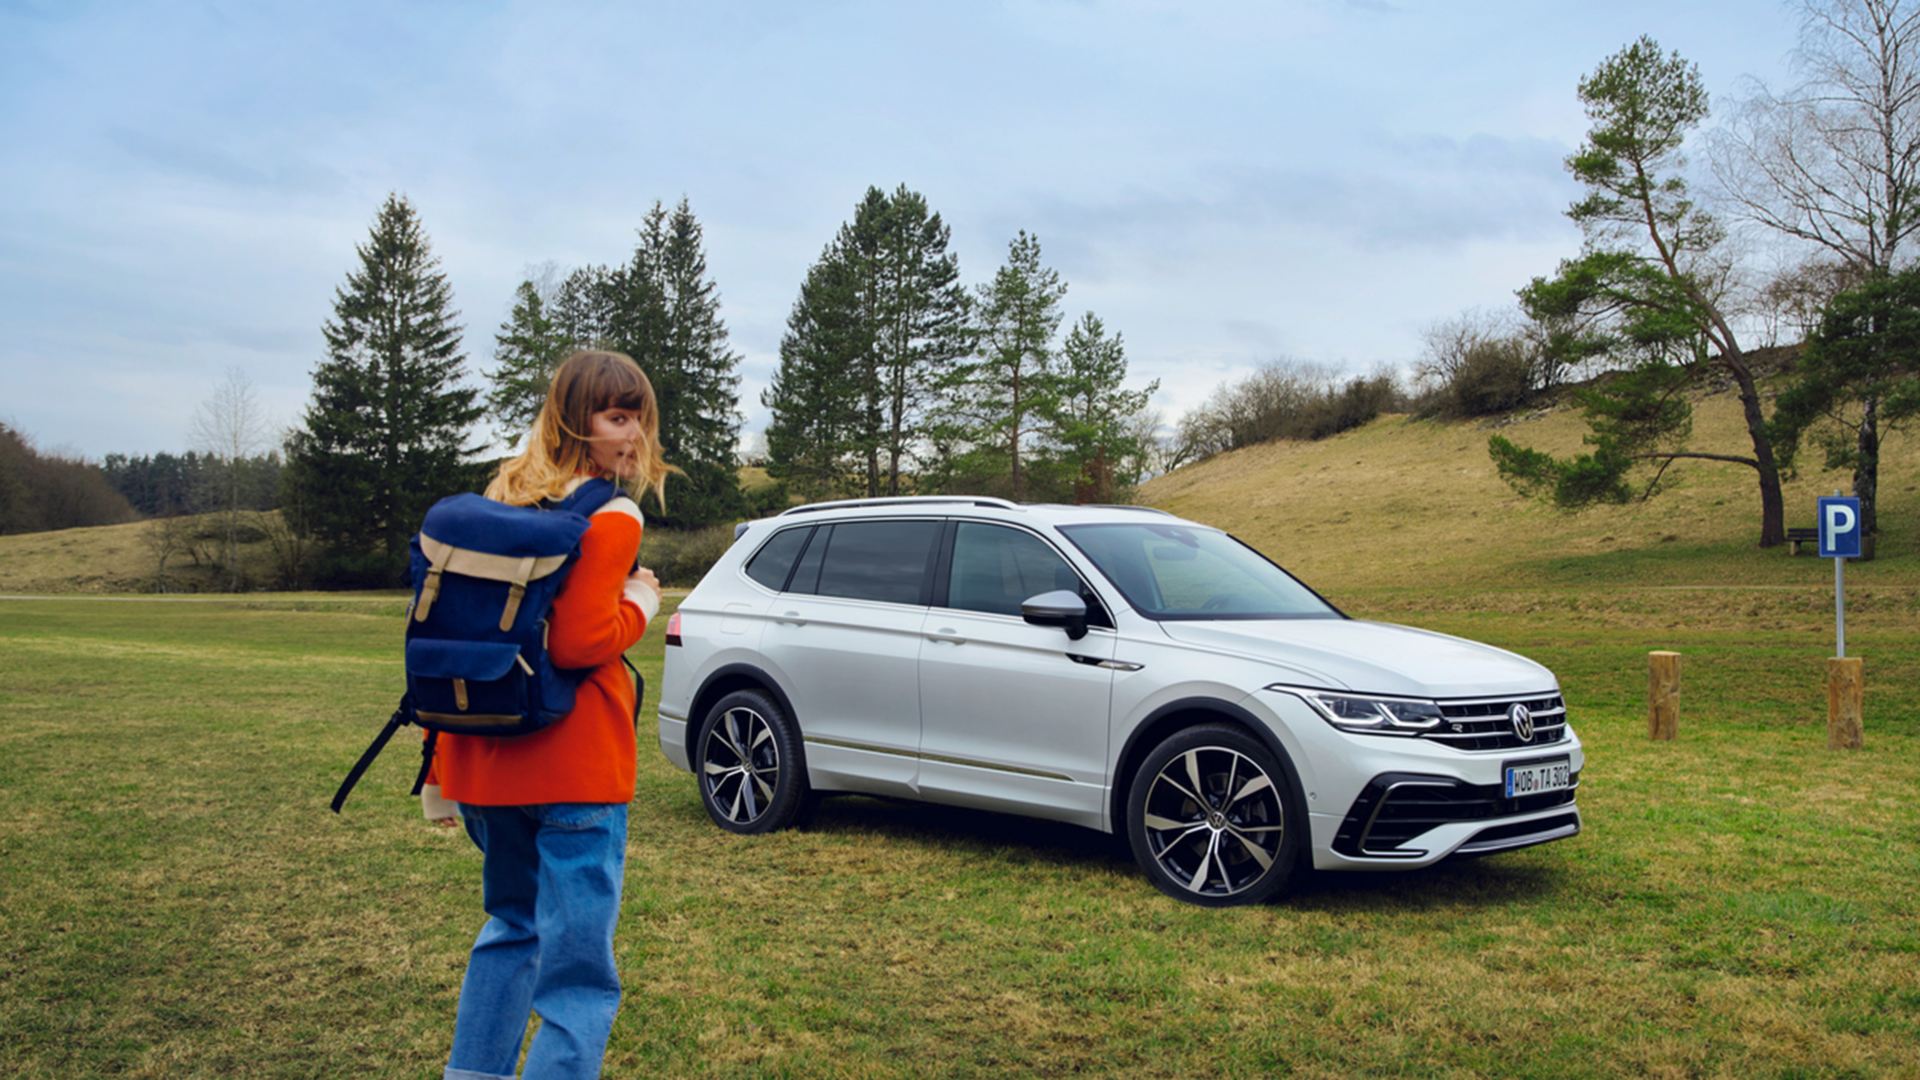 Tiguan Allspace <strong>Tiguan Allspace</strong><br>The flexibility of more space